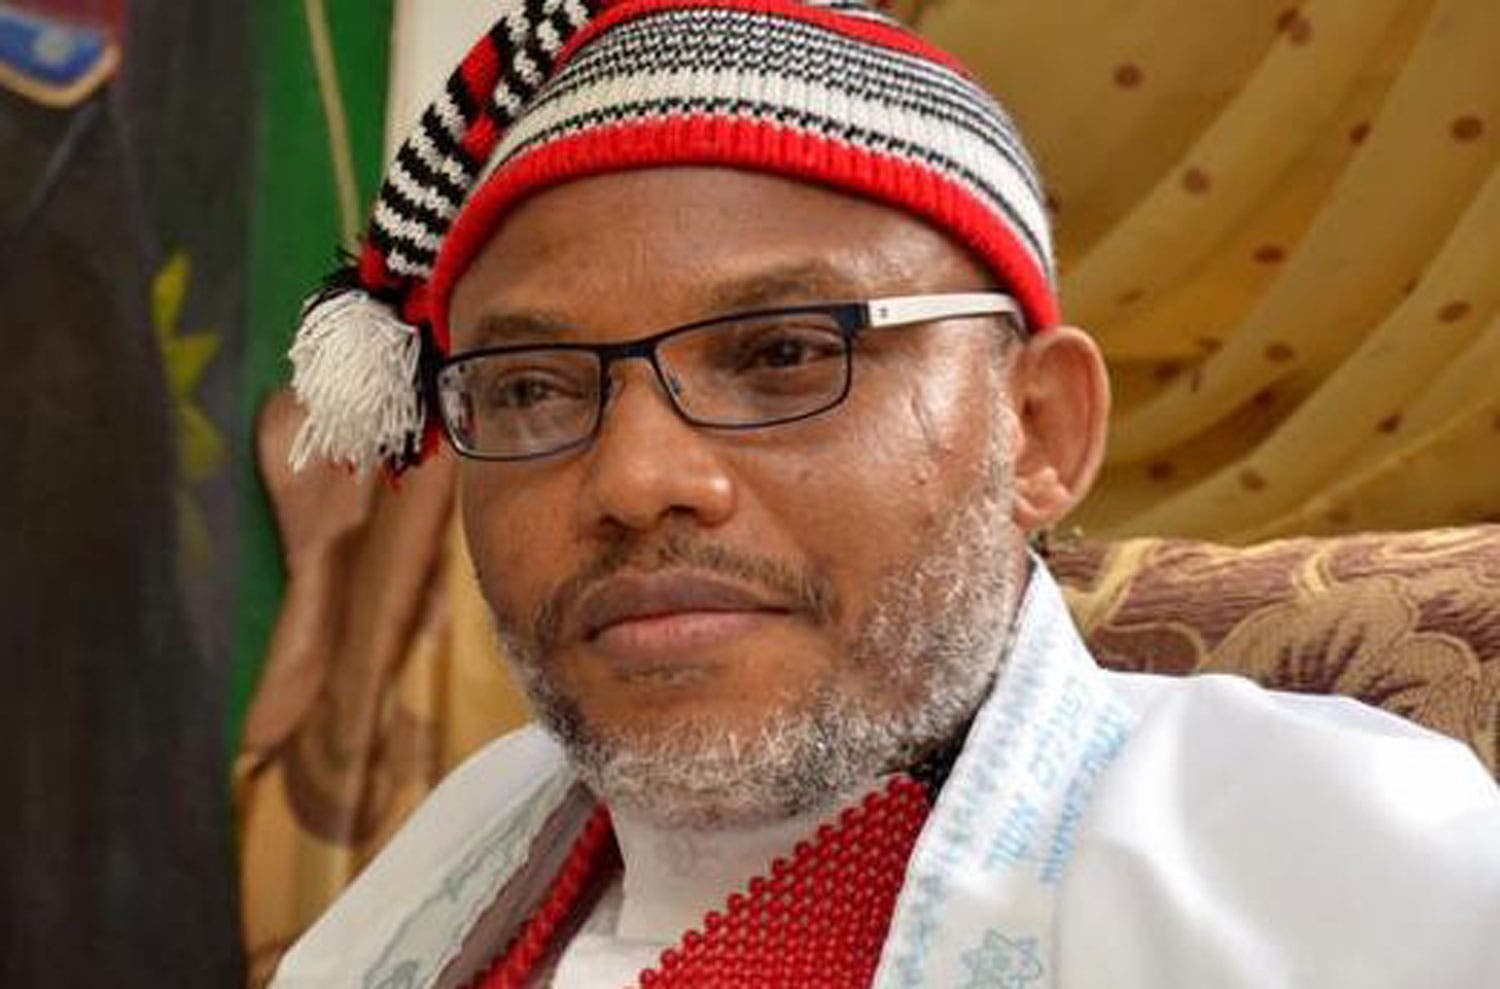 Biafra: Why court awarded N500m to Nnamdi Kanu against FG (See details)